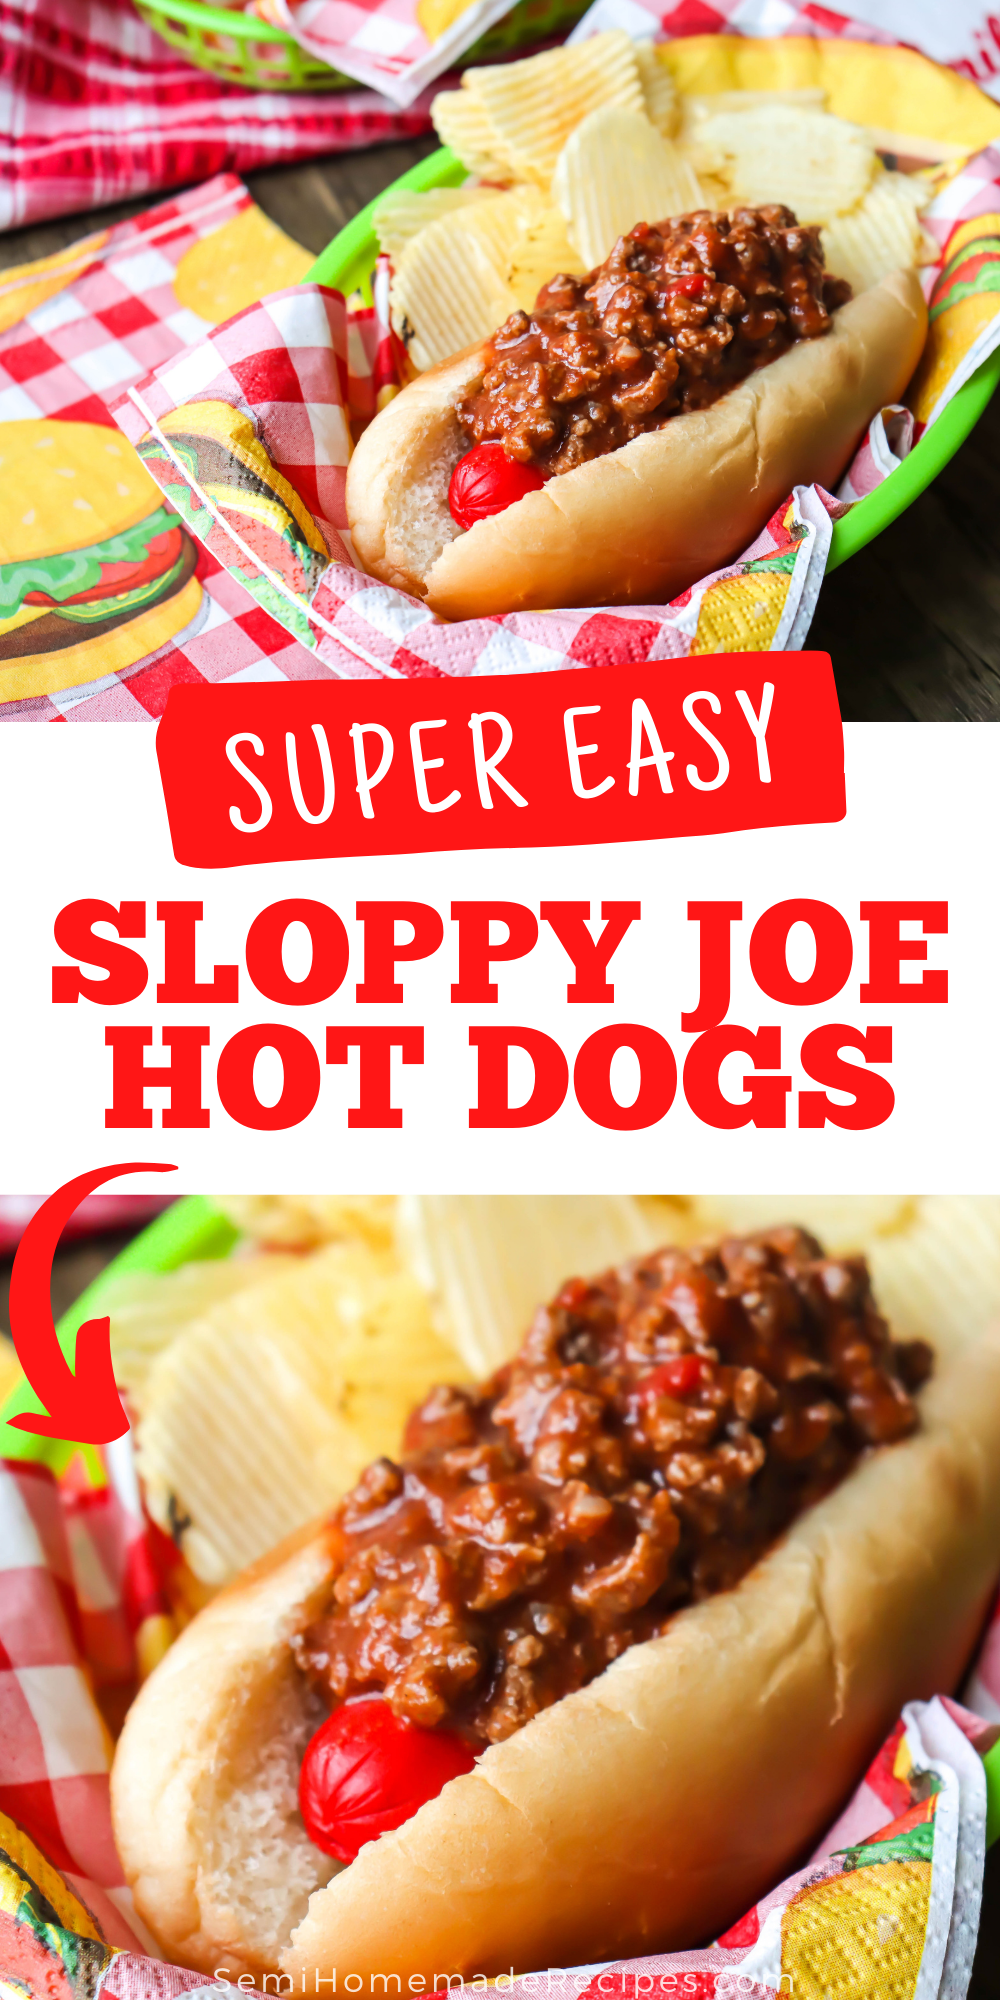 Combine Sloppy Joe Sandwiches and Hot Dogs and make these Sloppy Joe Hot Dogs for a super easy dinner this week!